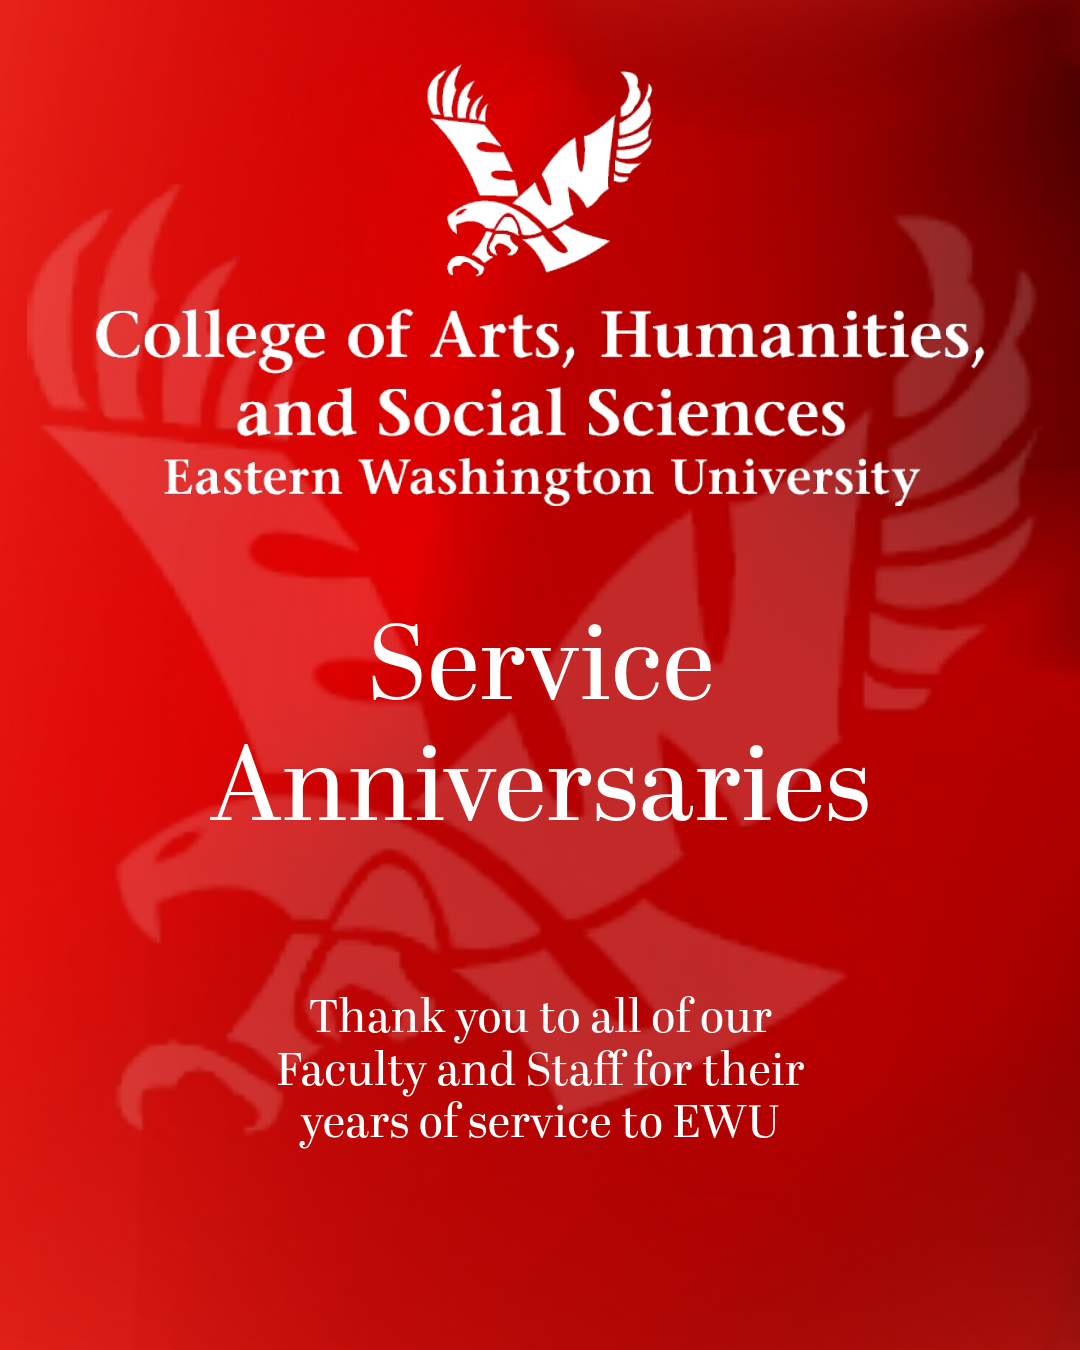 College of Arts, Humanities, and Social Sciences Eastern Washington University Service Anniversaries Thank you to all of our Faculty and Staff for their years of service at EWU